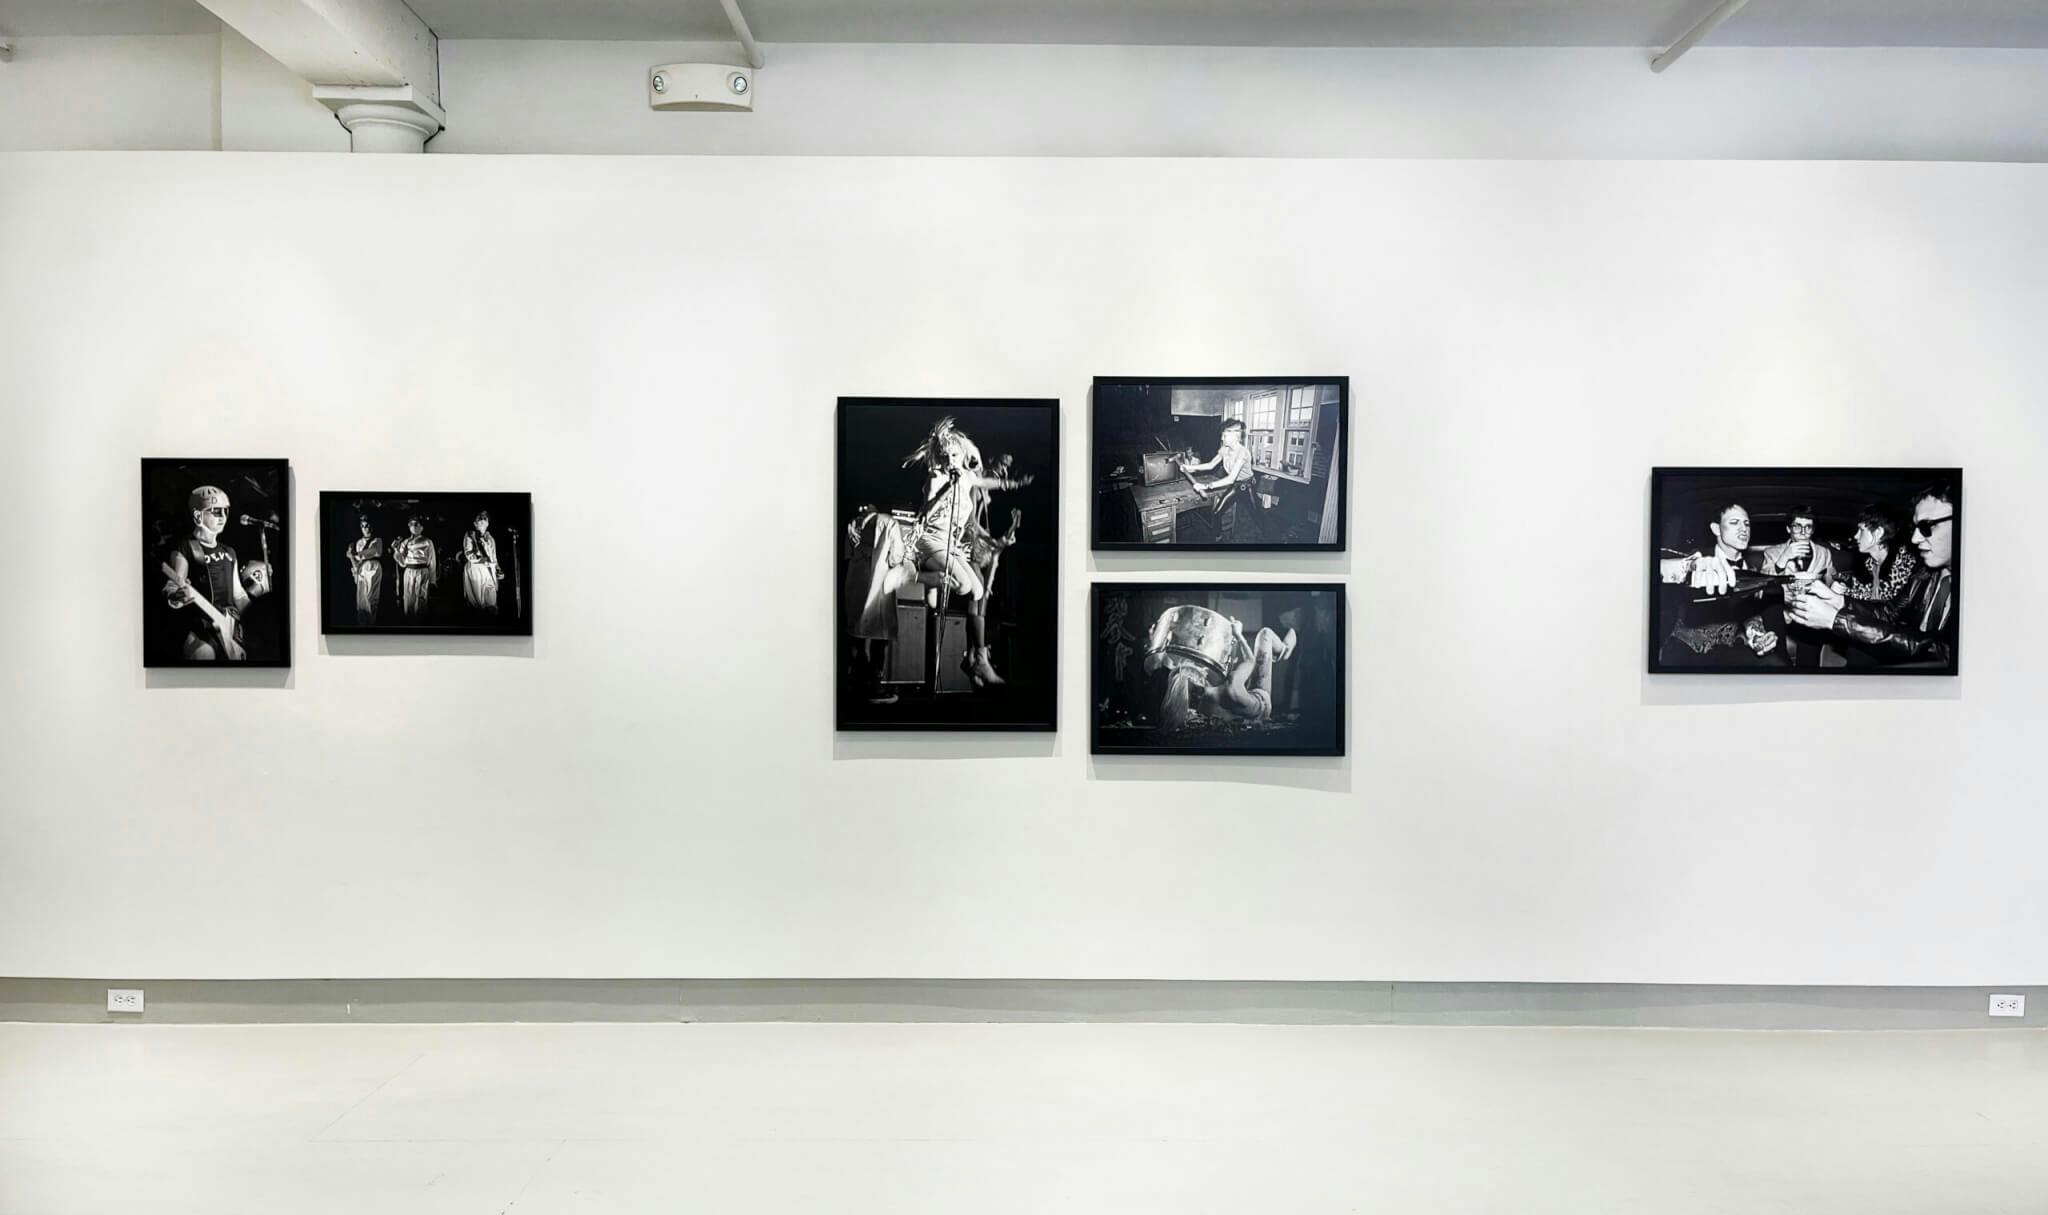 Installation view of "Days of Punk" at Anderson Yezerski Gallery.